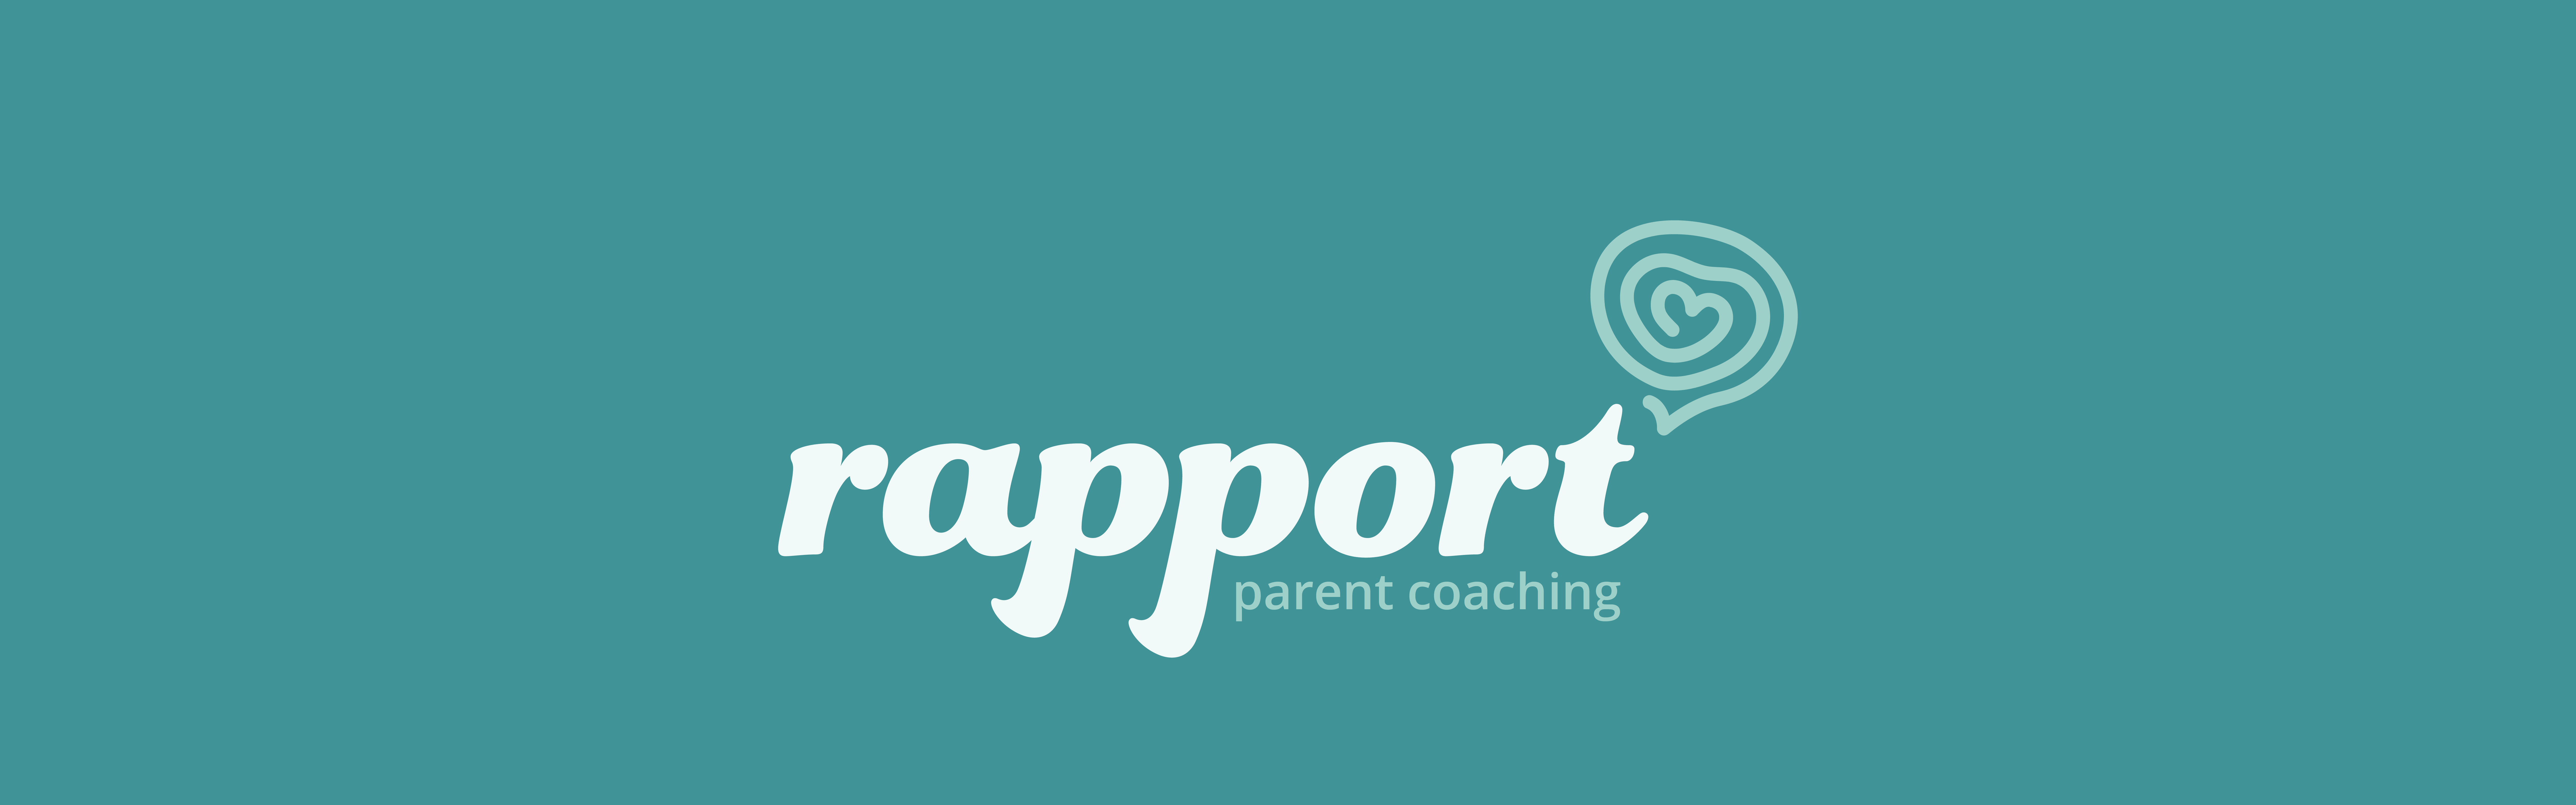 Logo of Rapport Parent Coaching featuring stylized text and an icon resembling a heart and speech bubble combination.